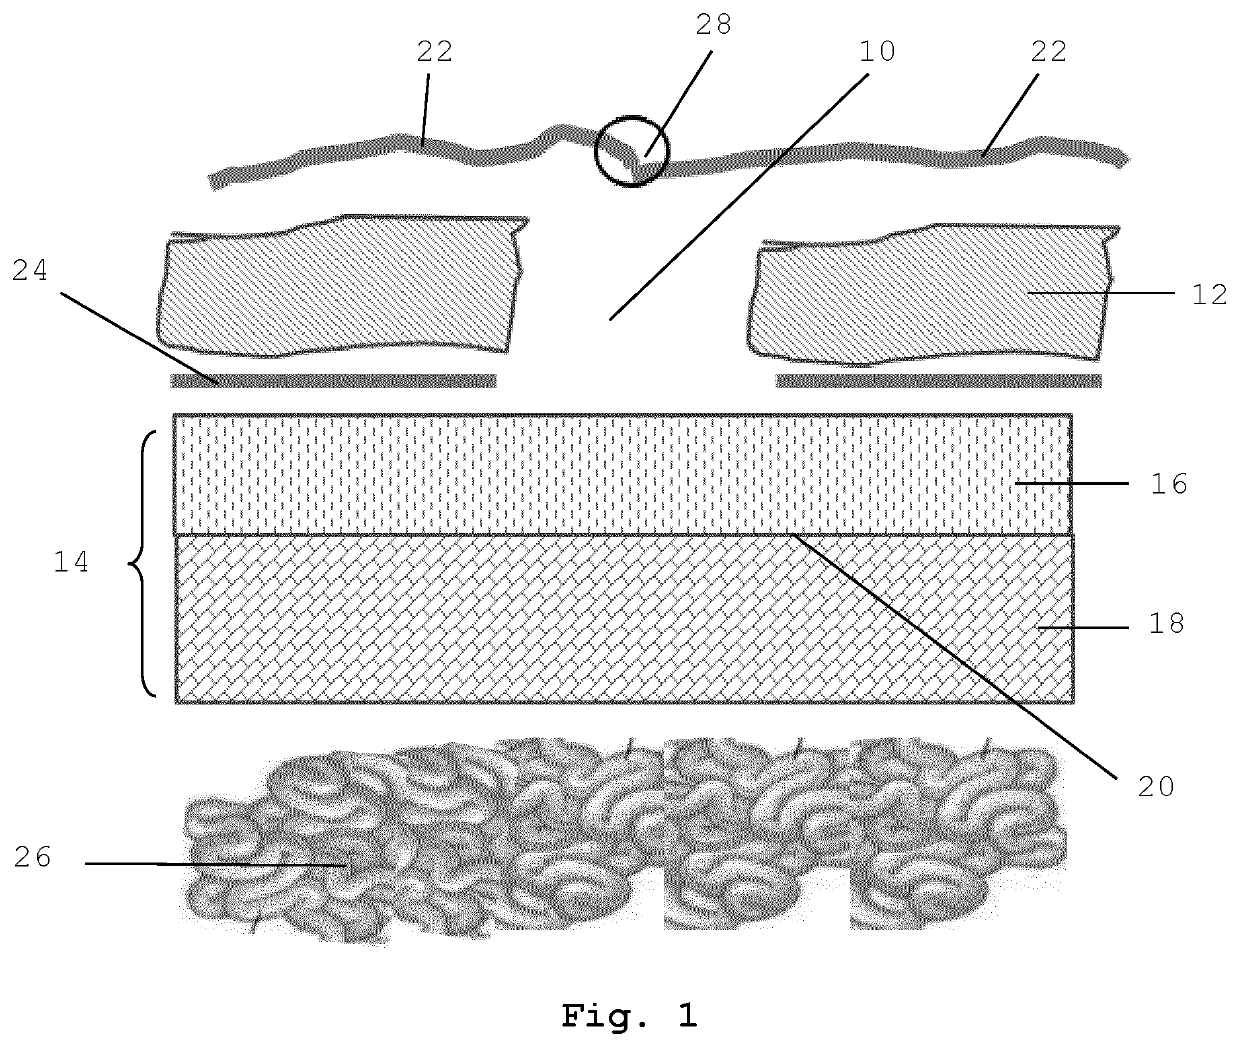 Biodegradable Two-Layered Matrix for Preventing Post-Surgical Adhesions